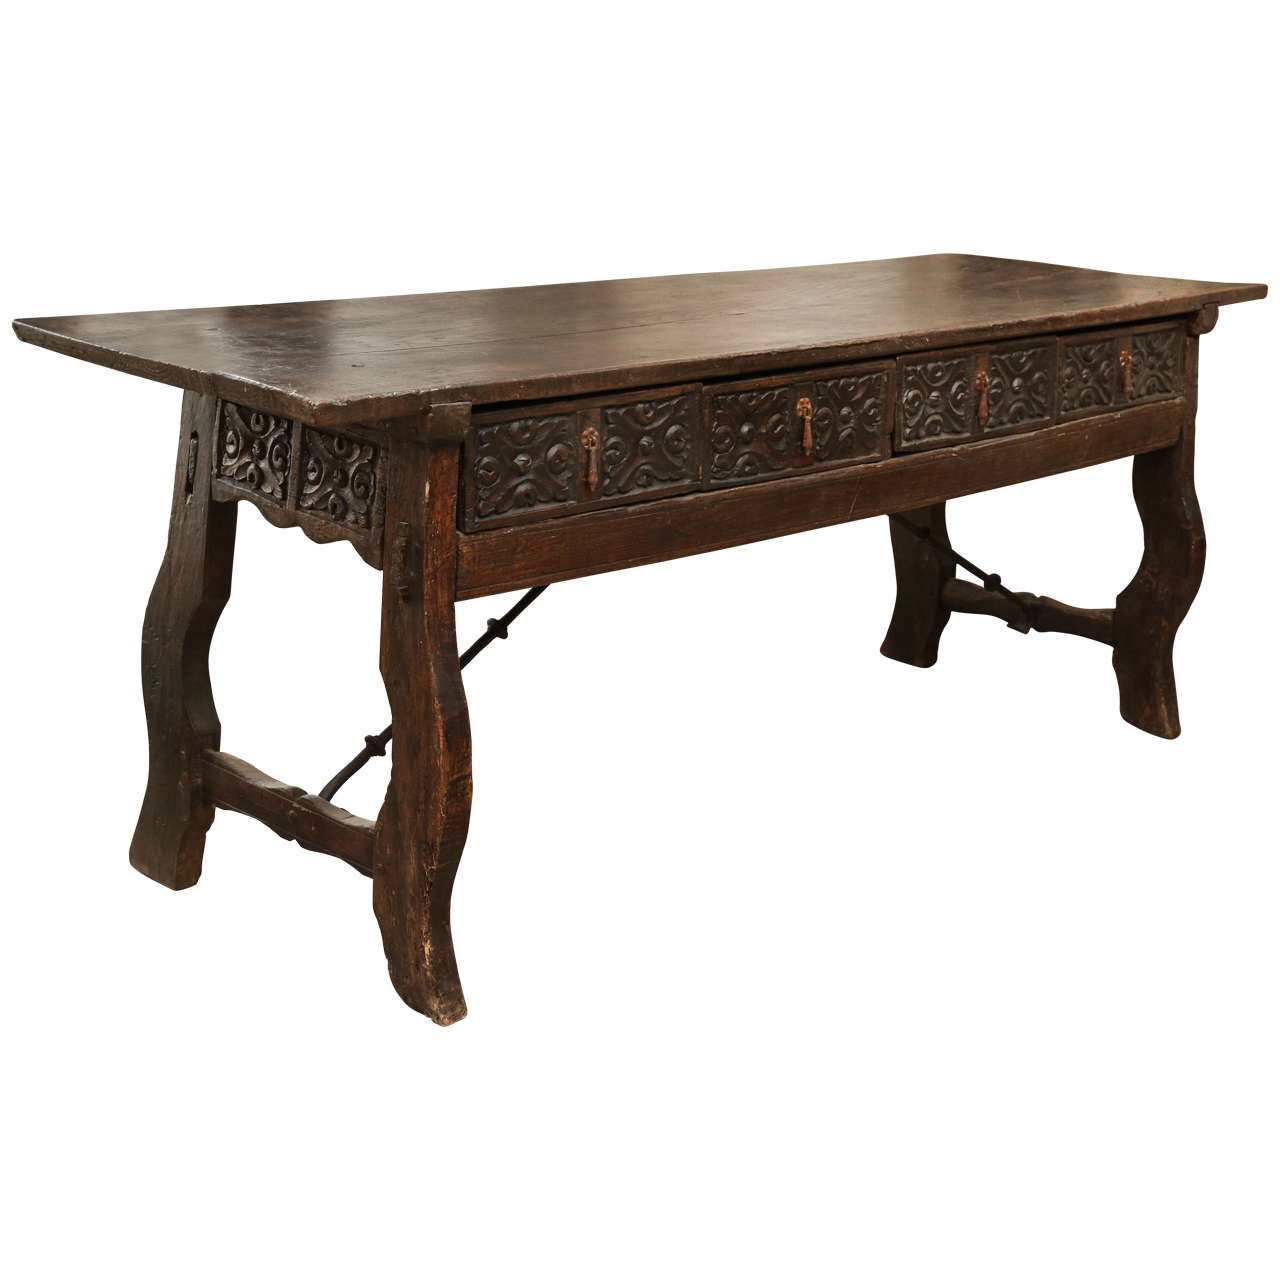 Late 17th Century Carved Chestnut Table